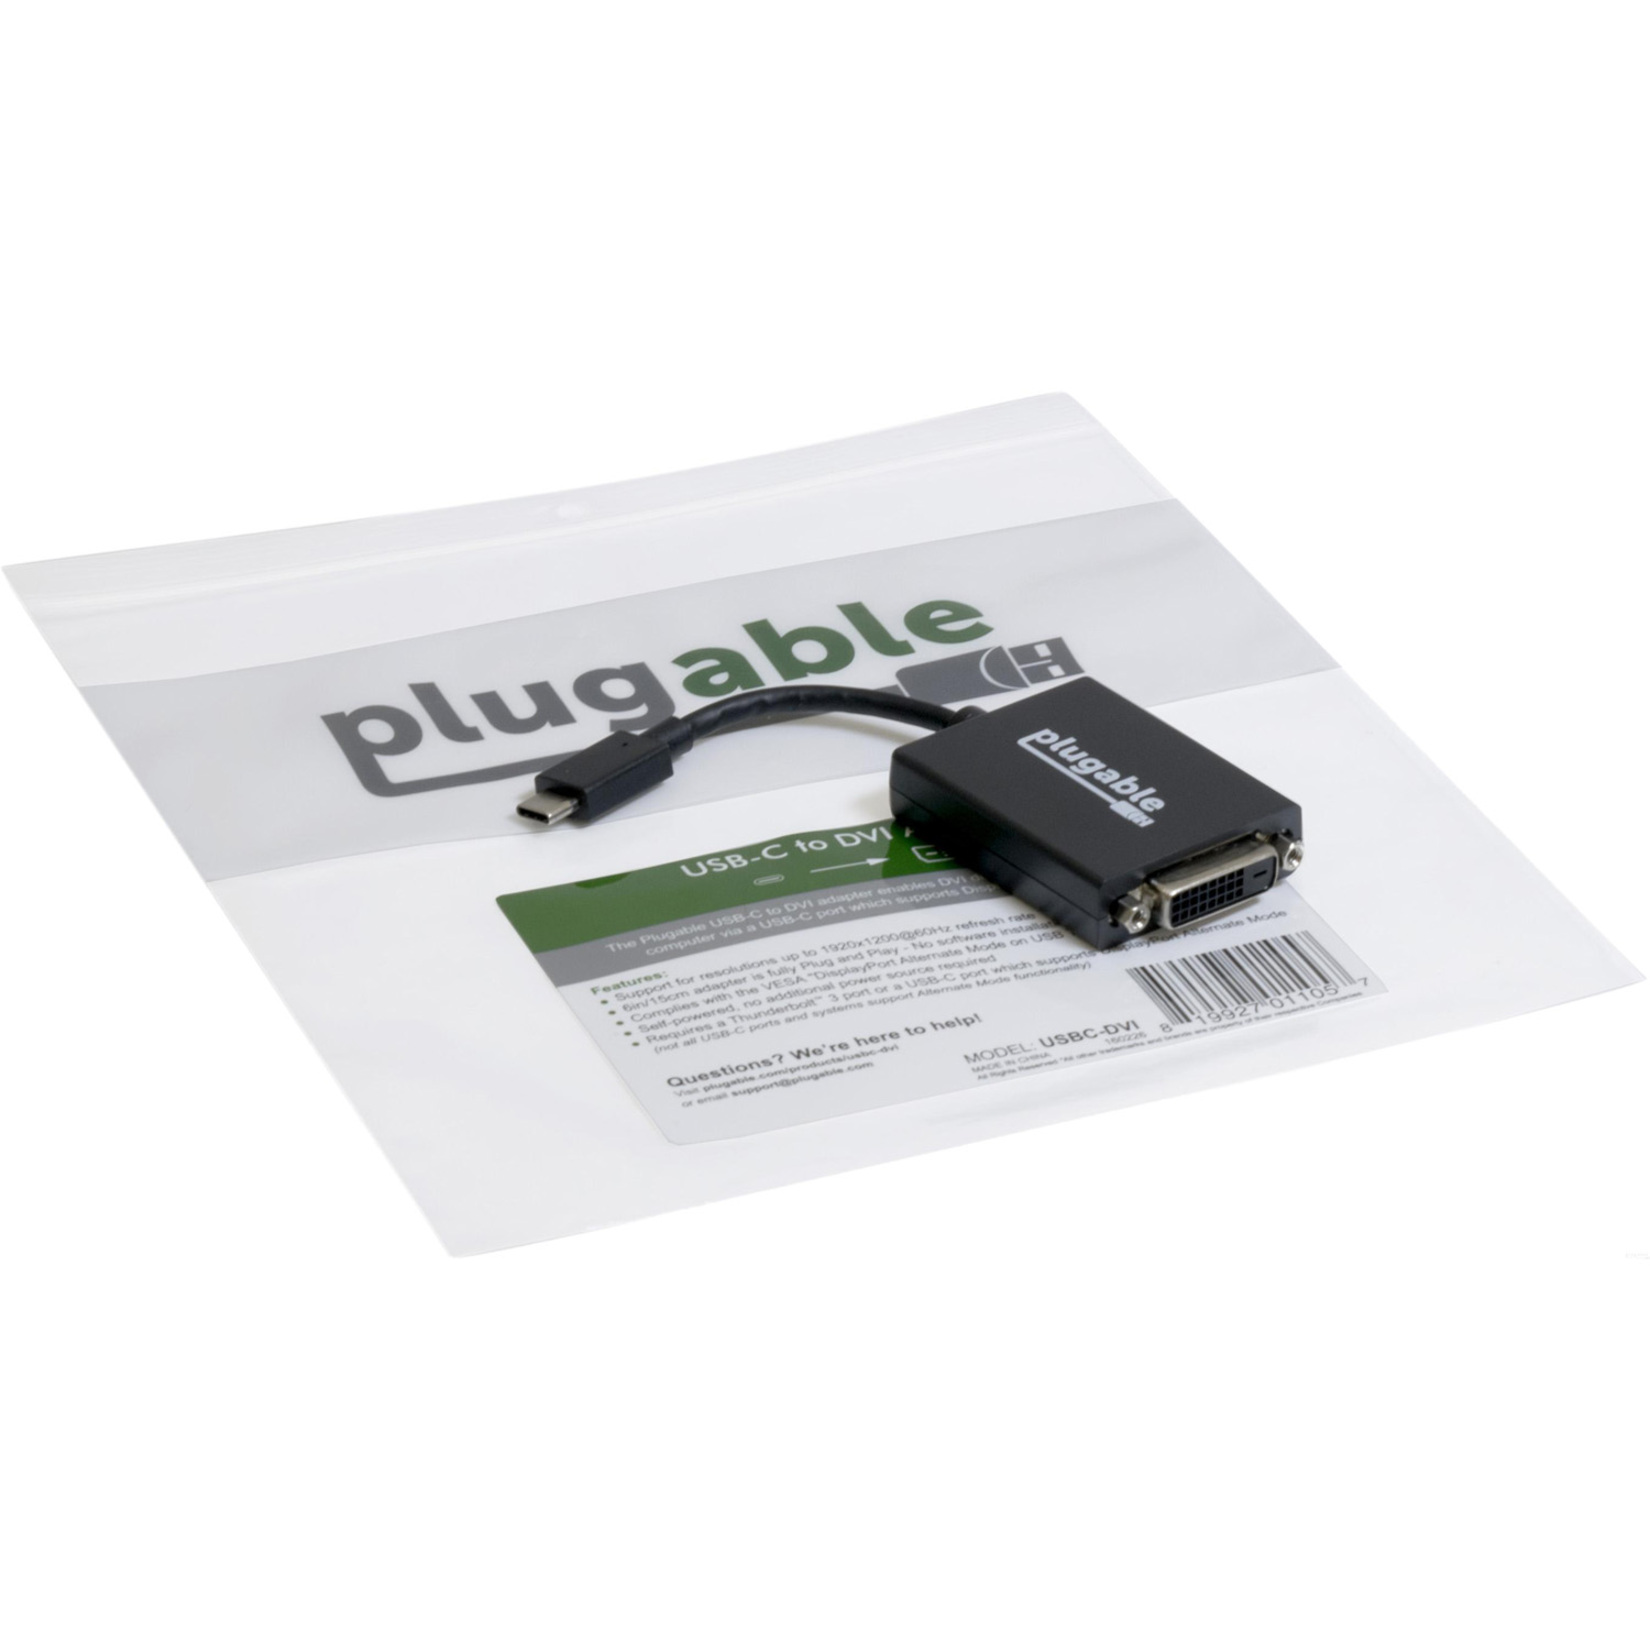 Plugable USB C to DVI Adapter - Connect Your USB-C Laptop to a DVI Display up to 1920x1200 - Compatible with 2017 and later Mac and Windows PCs - image 2 of 5